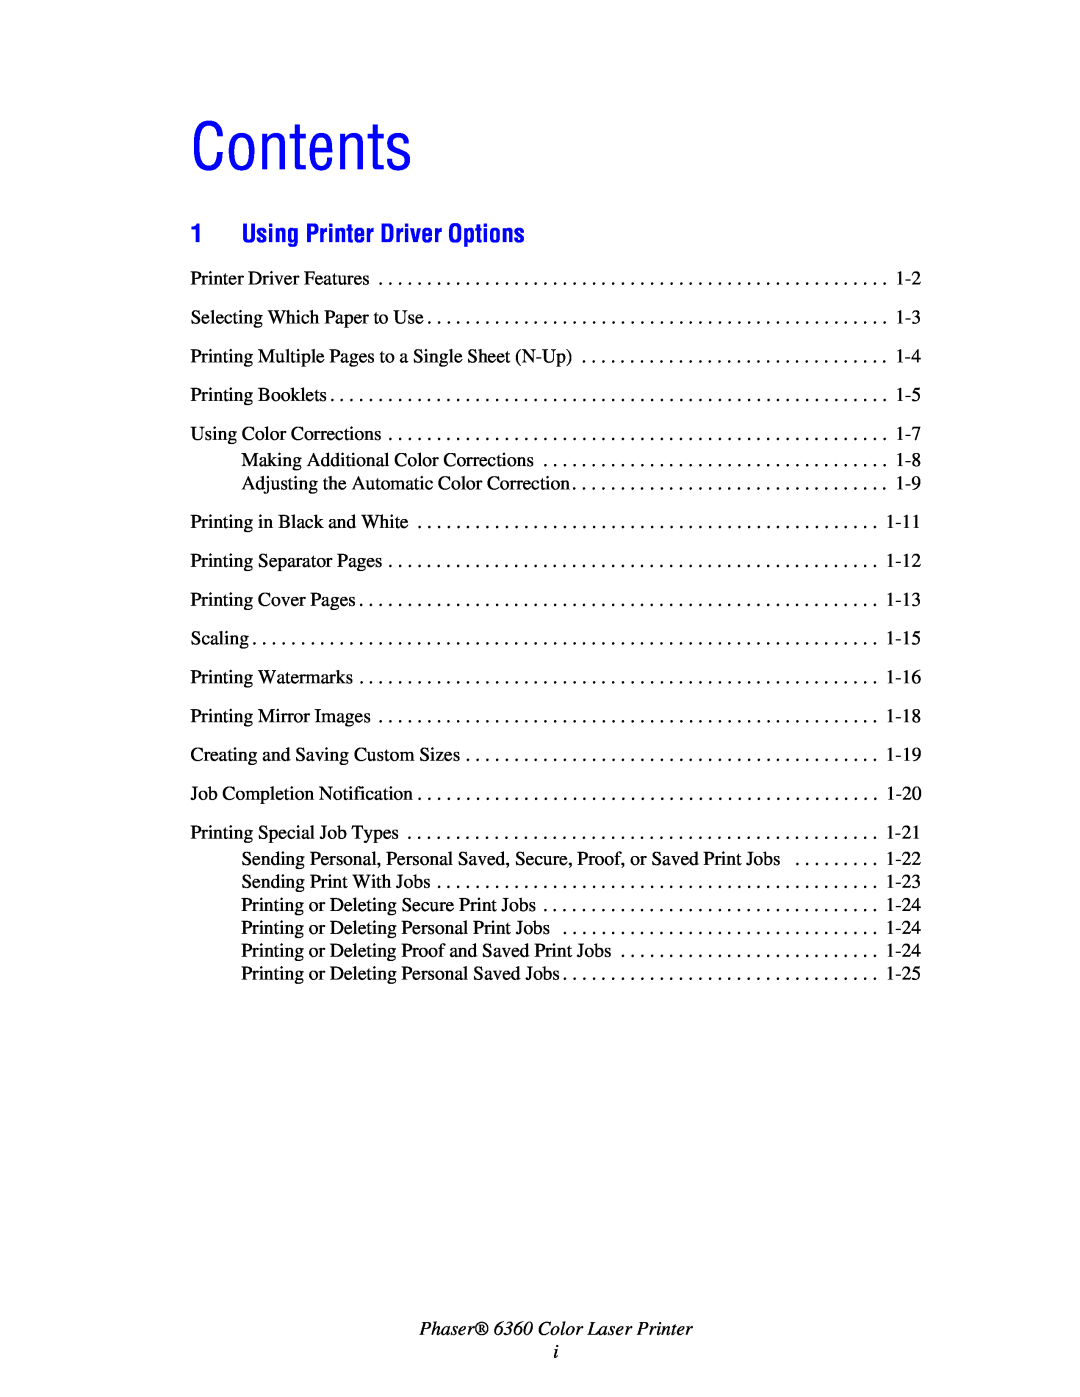 Xerox manual Contents, Using Printer Driver Options, Phaser 6360 Color Laser Printer i 